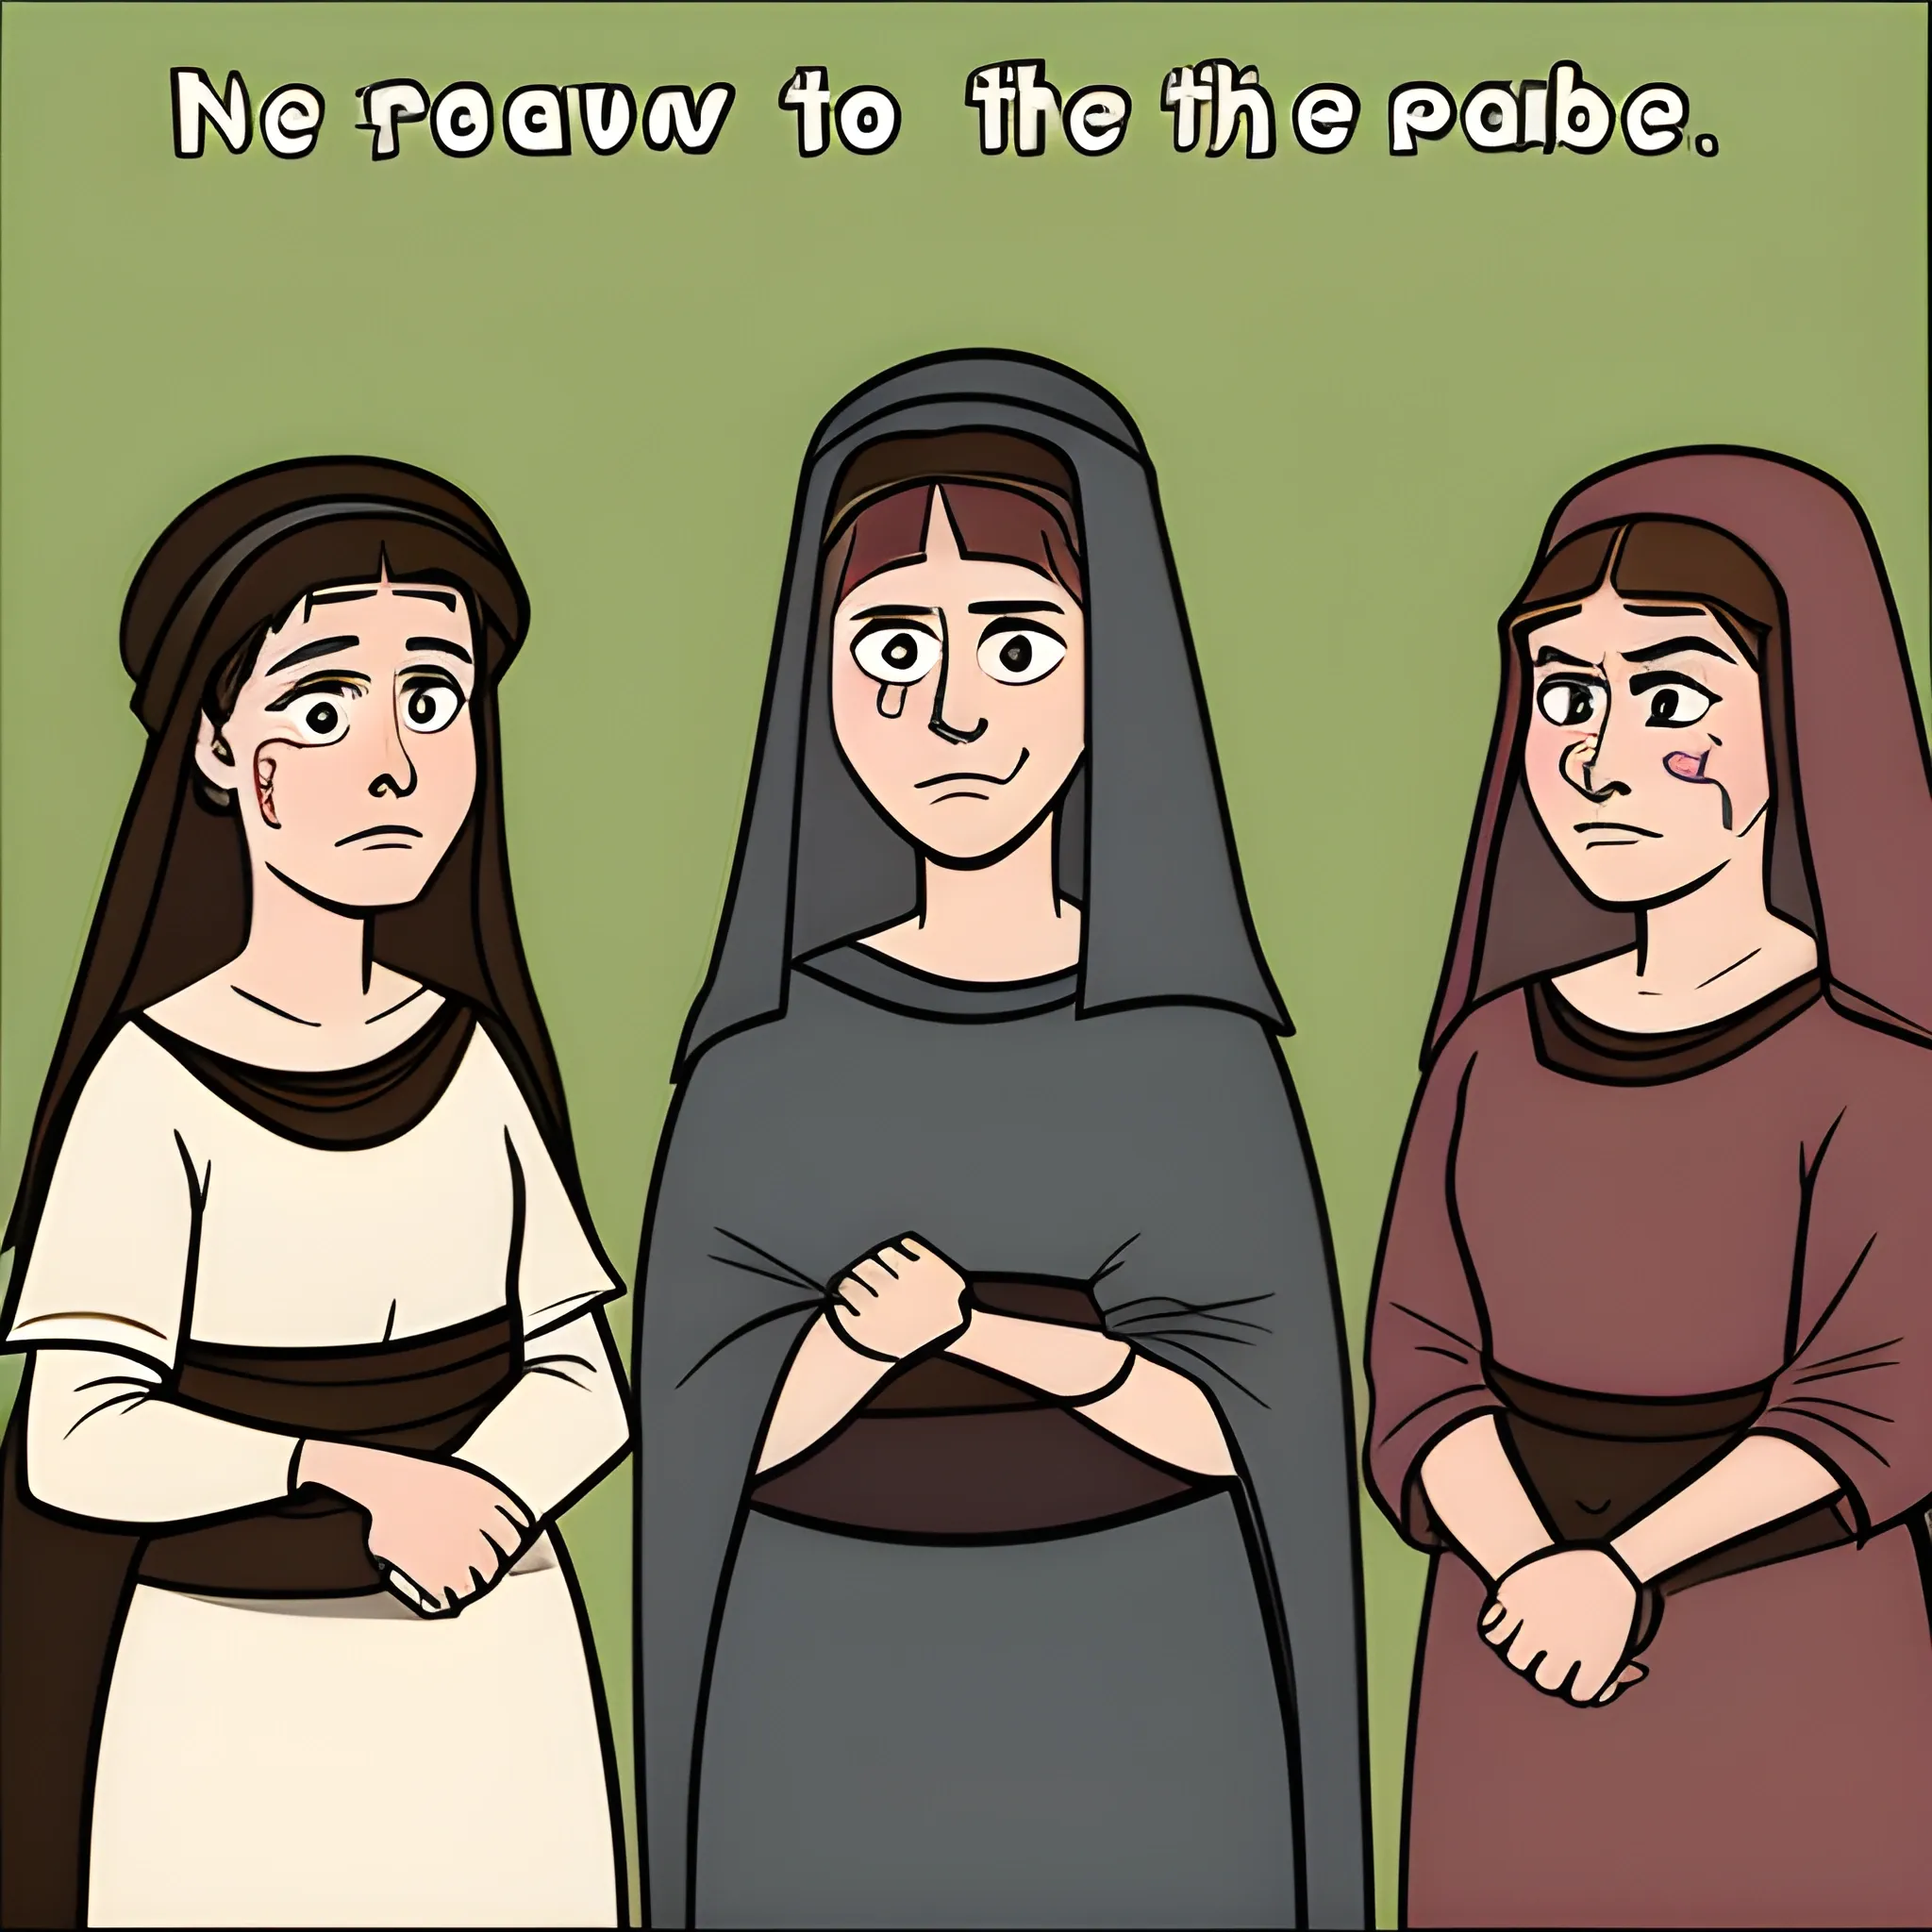  Draw eSTHER, RUTH AND RACHEL FROM THE BIBLE, Cartoon